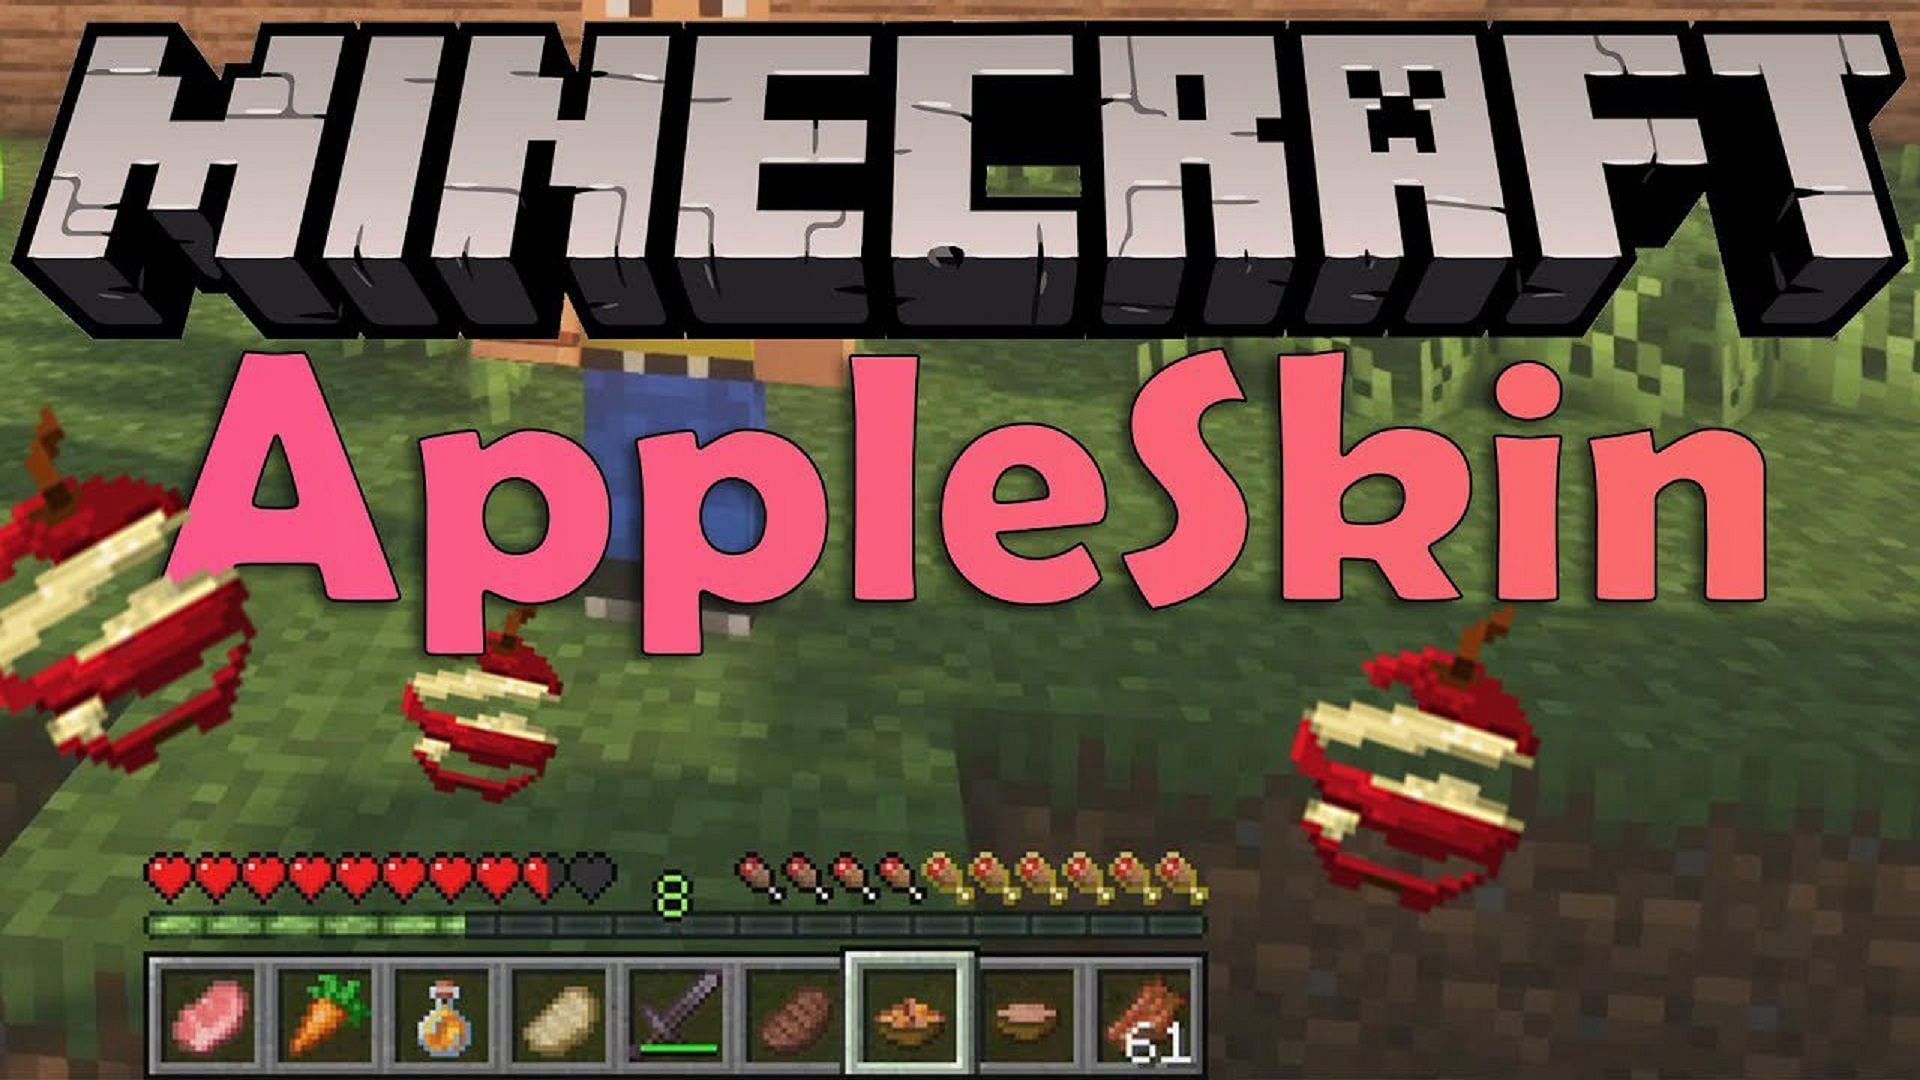 AppleSkin offers improved nutritional information when Minecraft players are having a snack (Image via Squeek502/9Minecraft)